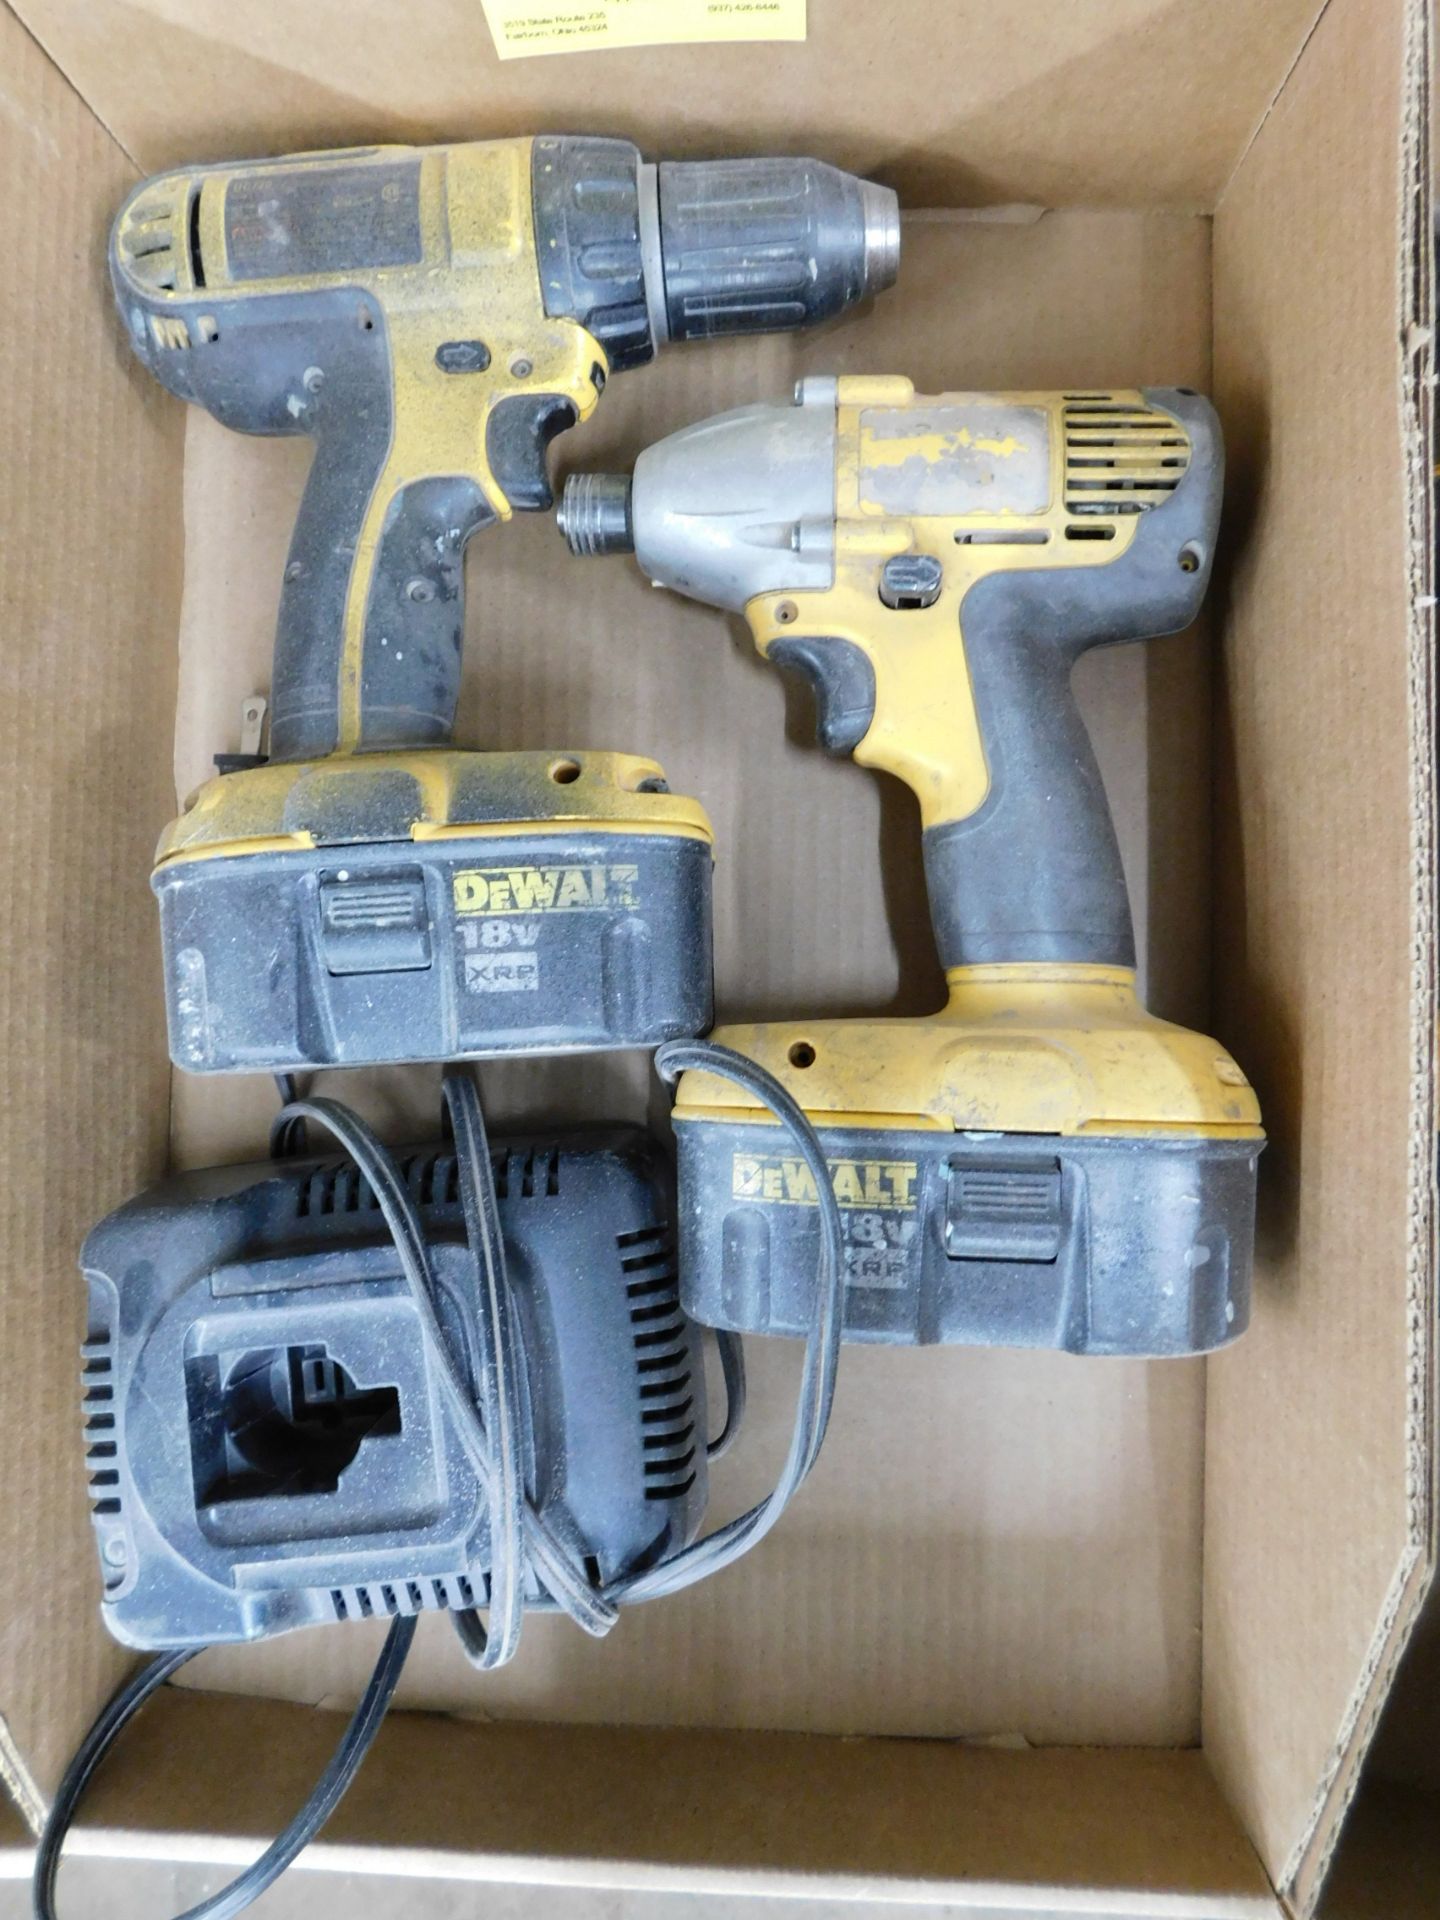 Dewalt Impact Driver and Dewalt Cordless Drill with Charger, 18V